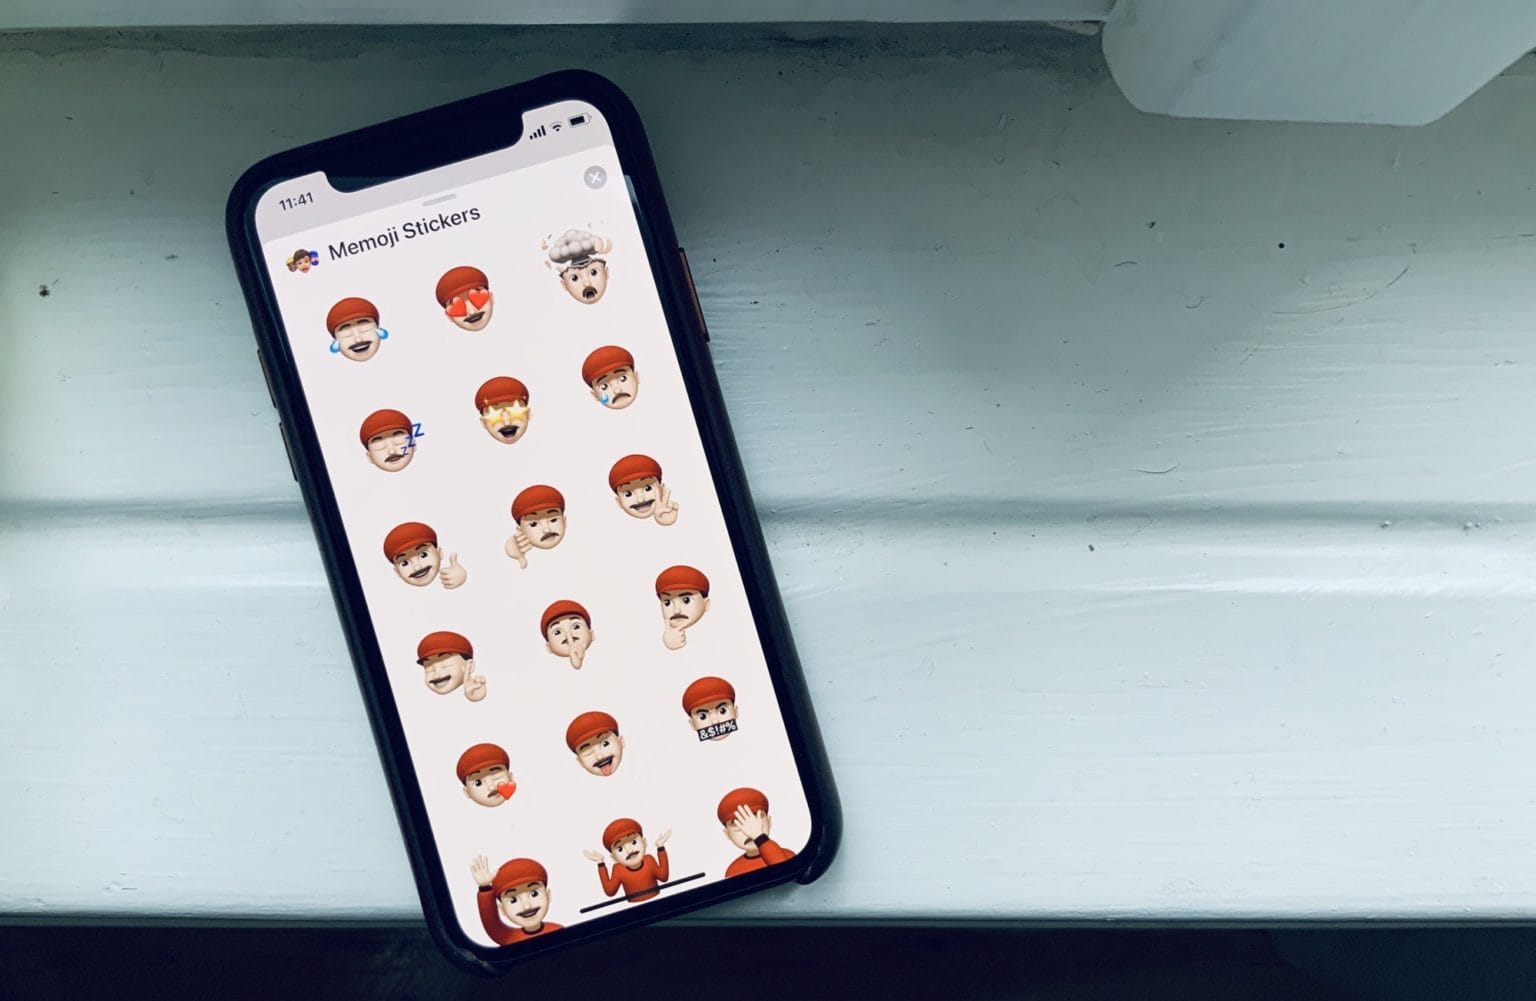 Want to remove Memoji stickers from your keyboard? It's easy to switch them off.